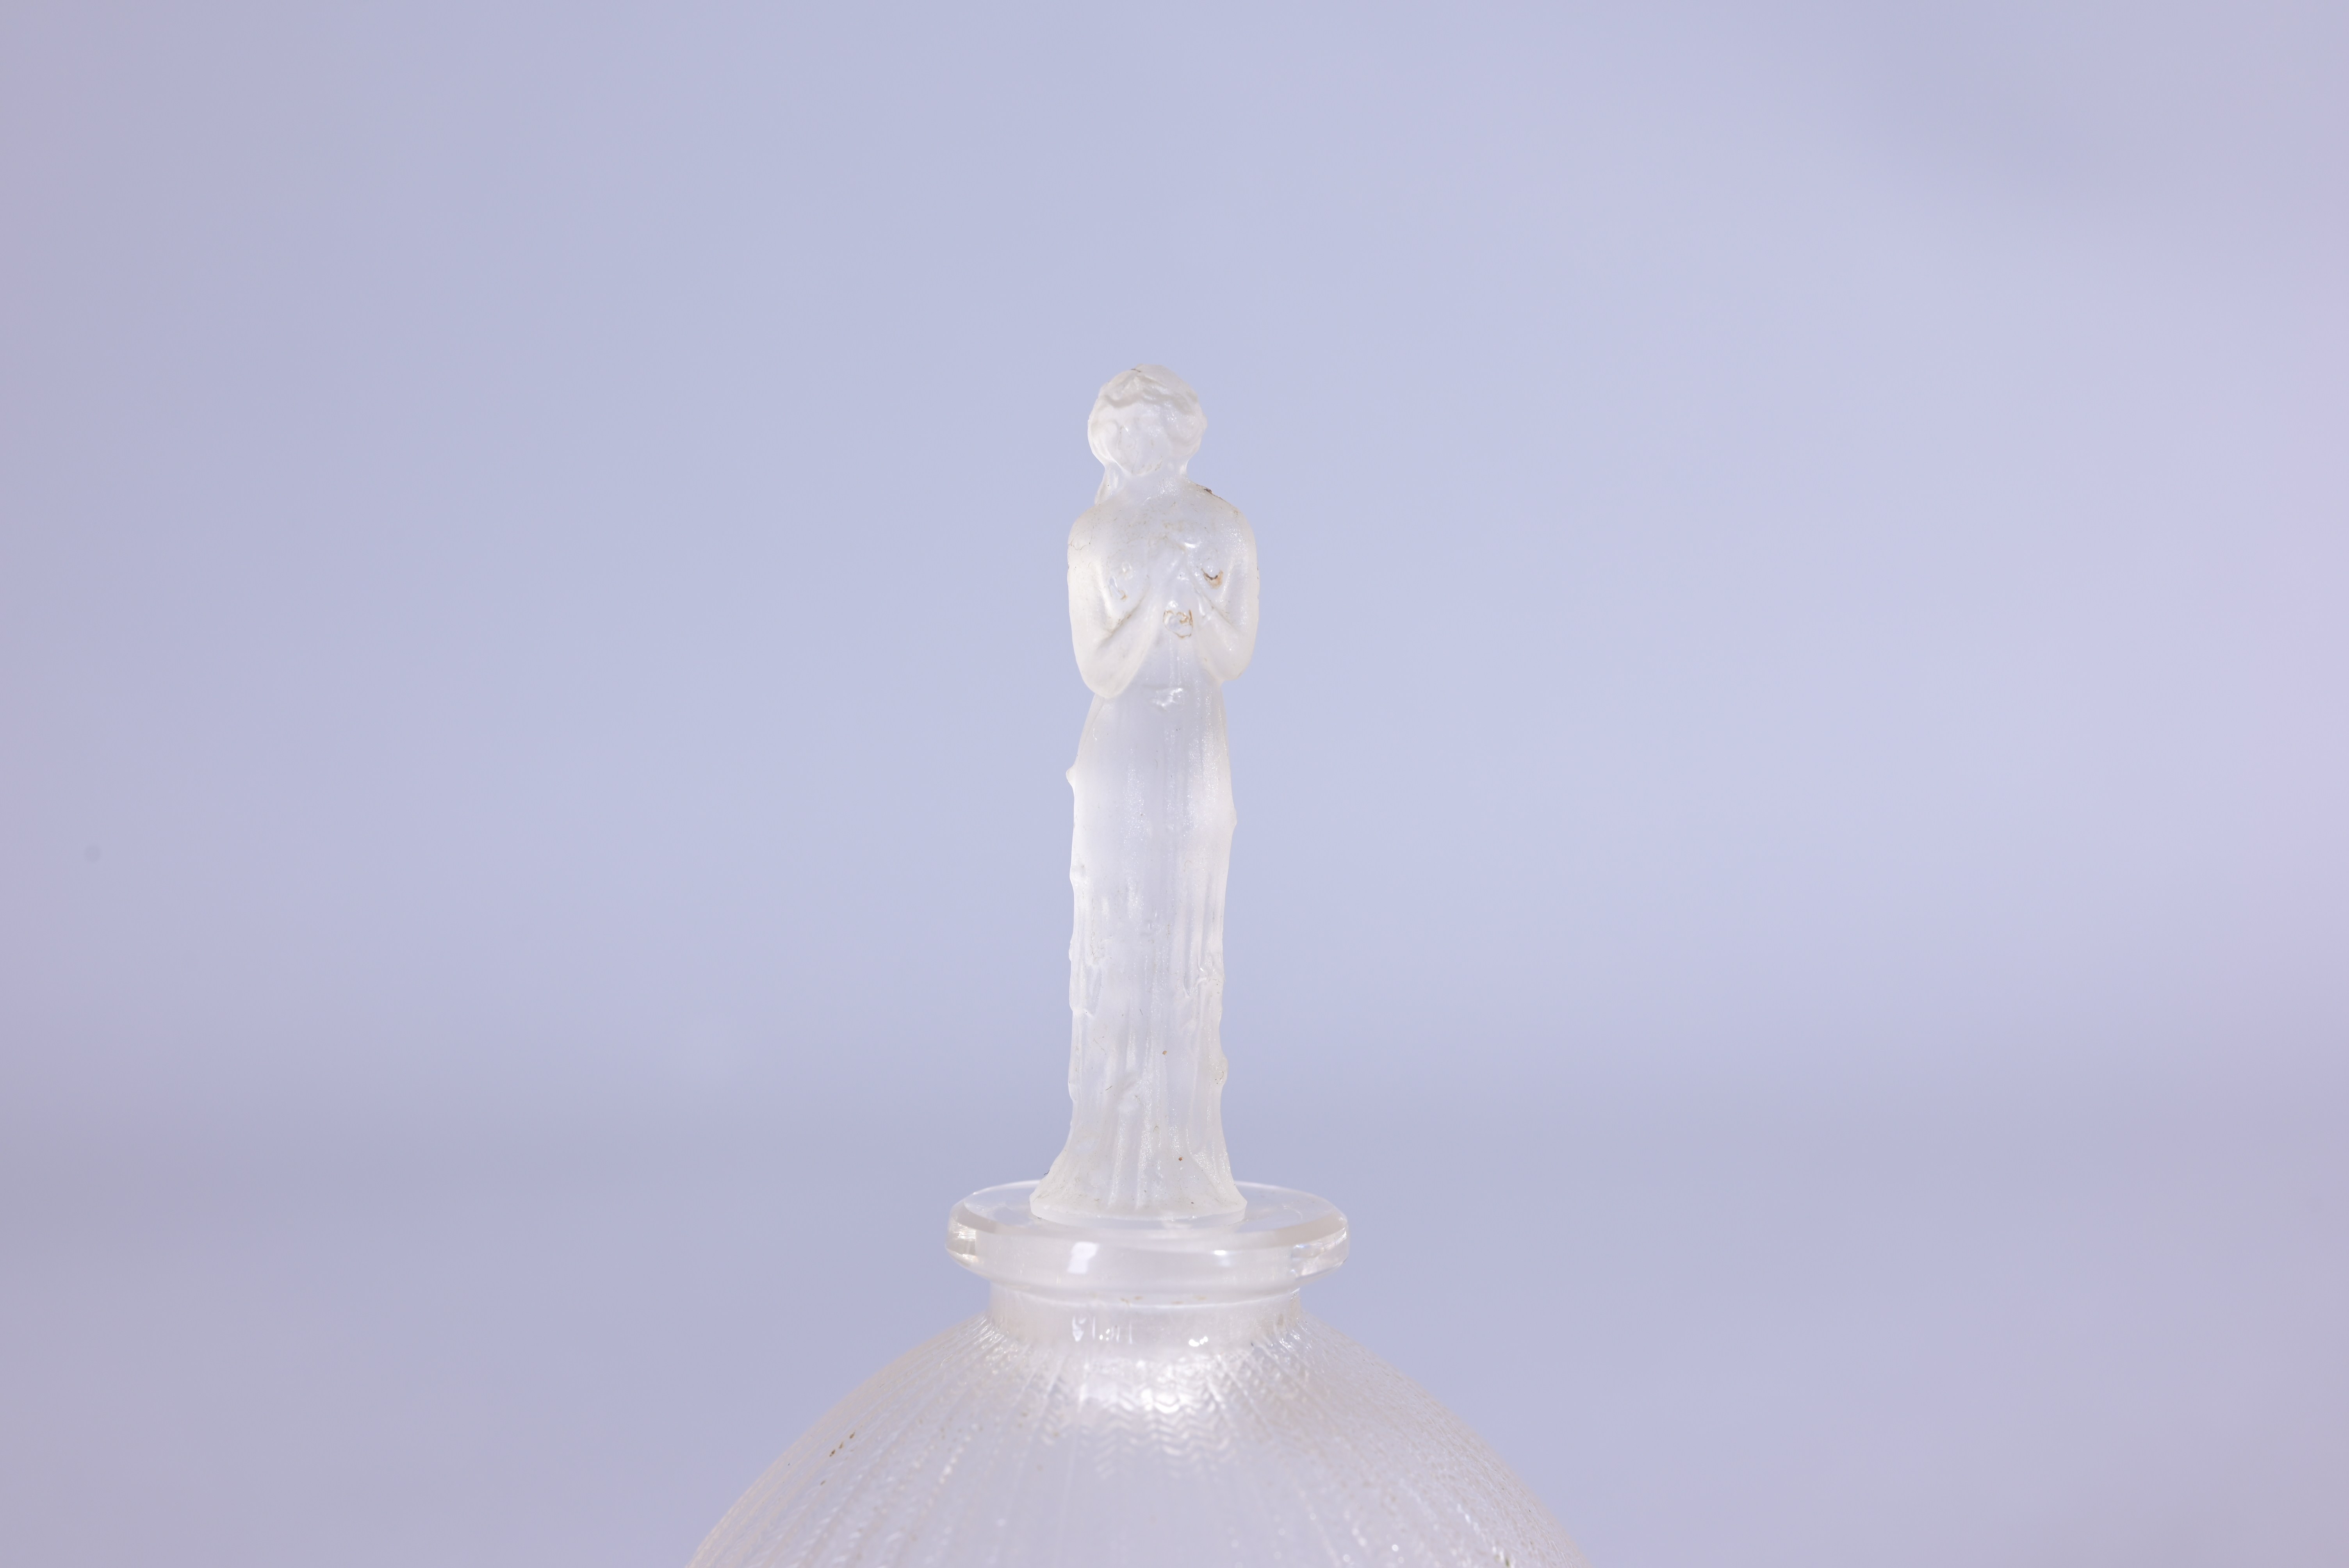 Rene Lalique "Roses" Perfume Bottle for D'Orsay - Image 3 of 7